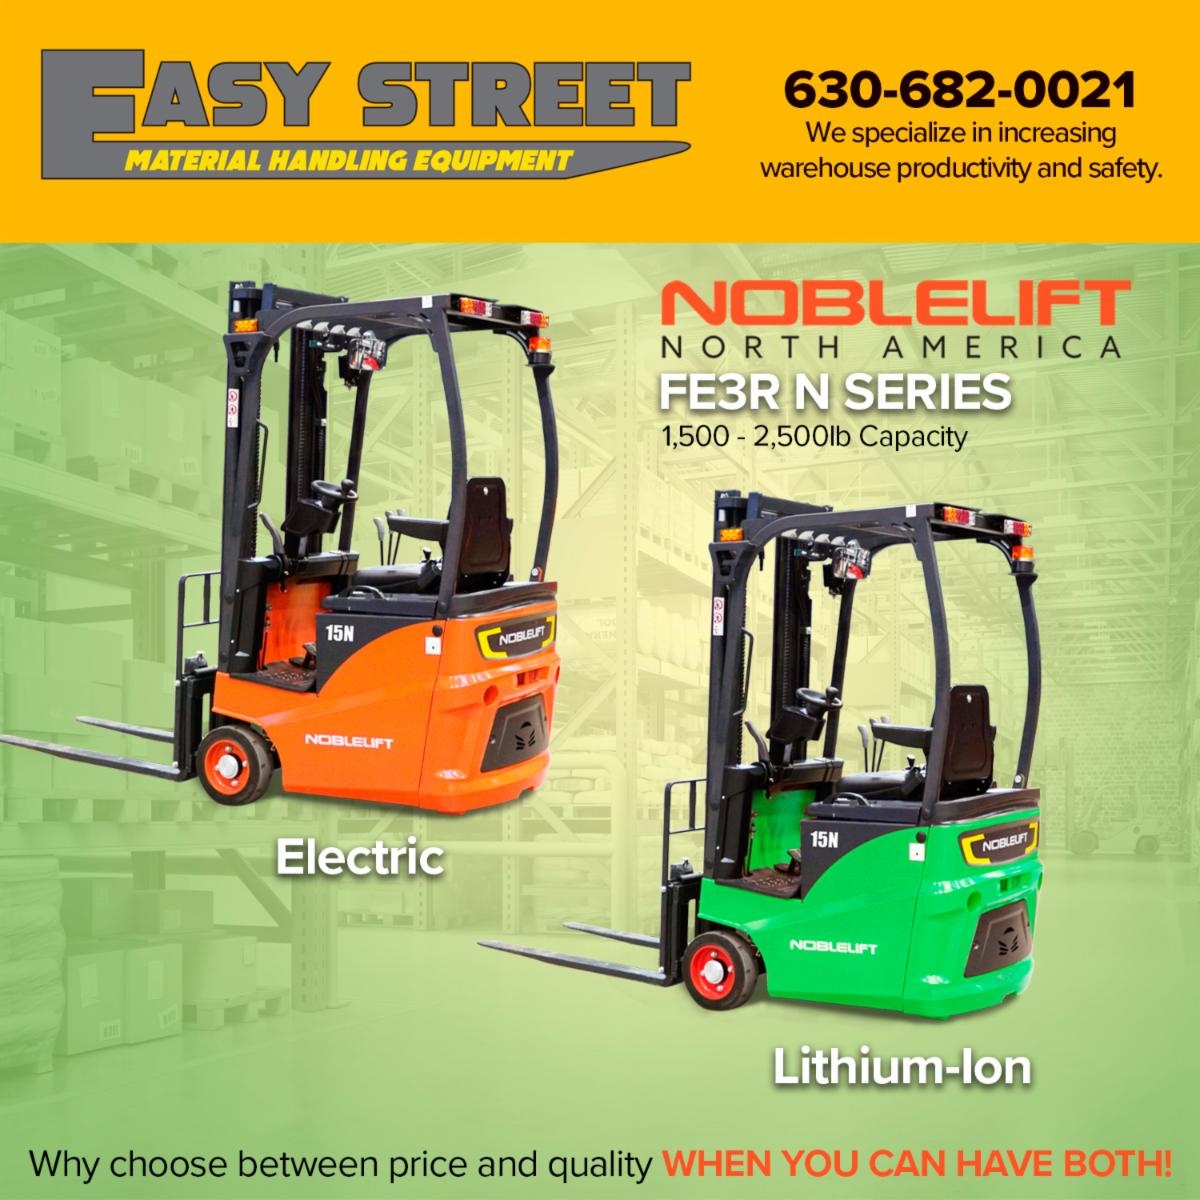 These 1500 to 2500lb capacity, cushion electric #forklifts offer a smart and compact design with great mobility. The FE3R N can turn within its own radius and provides maximum efficiency for your smaller operations.

 #NOBLELIFT #ElectricForklift #LithiumForklift